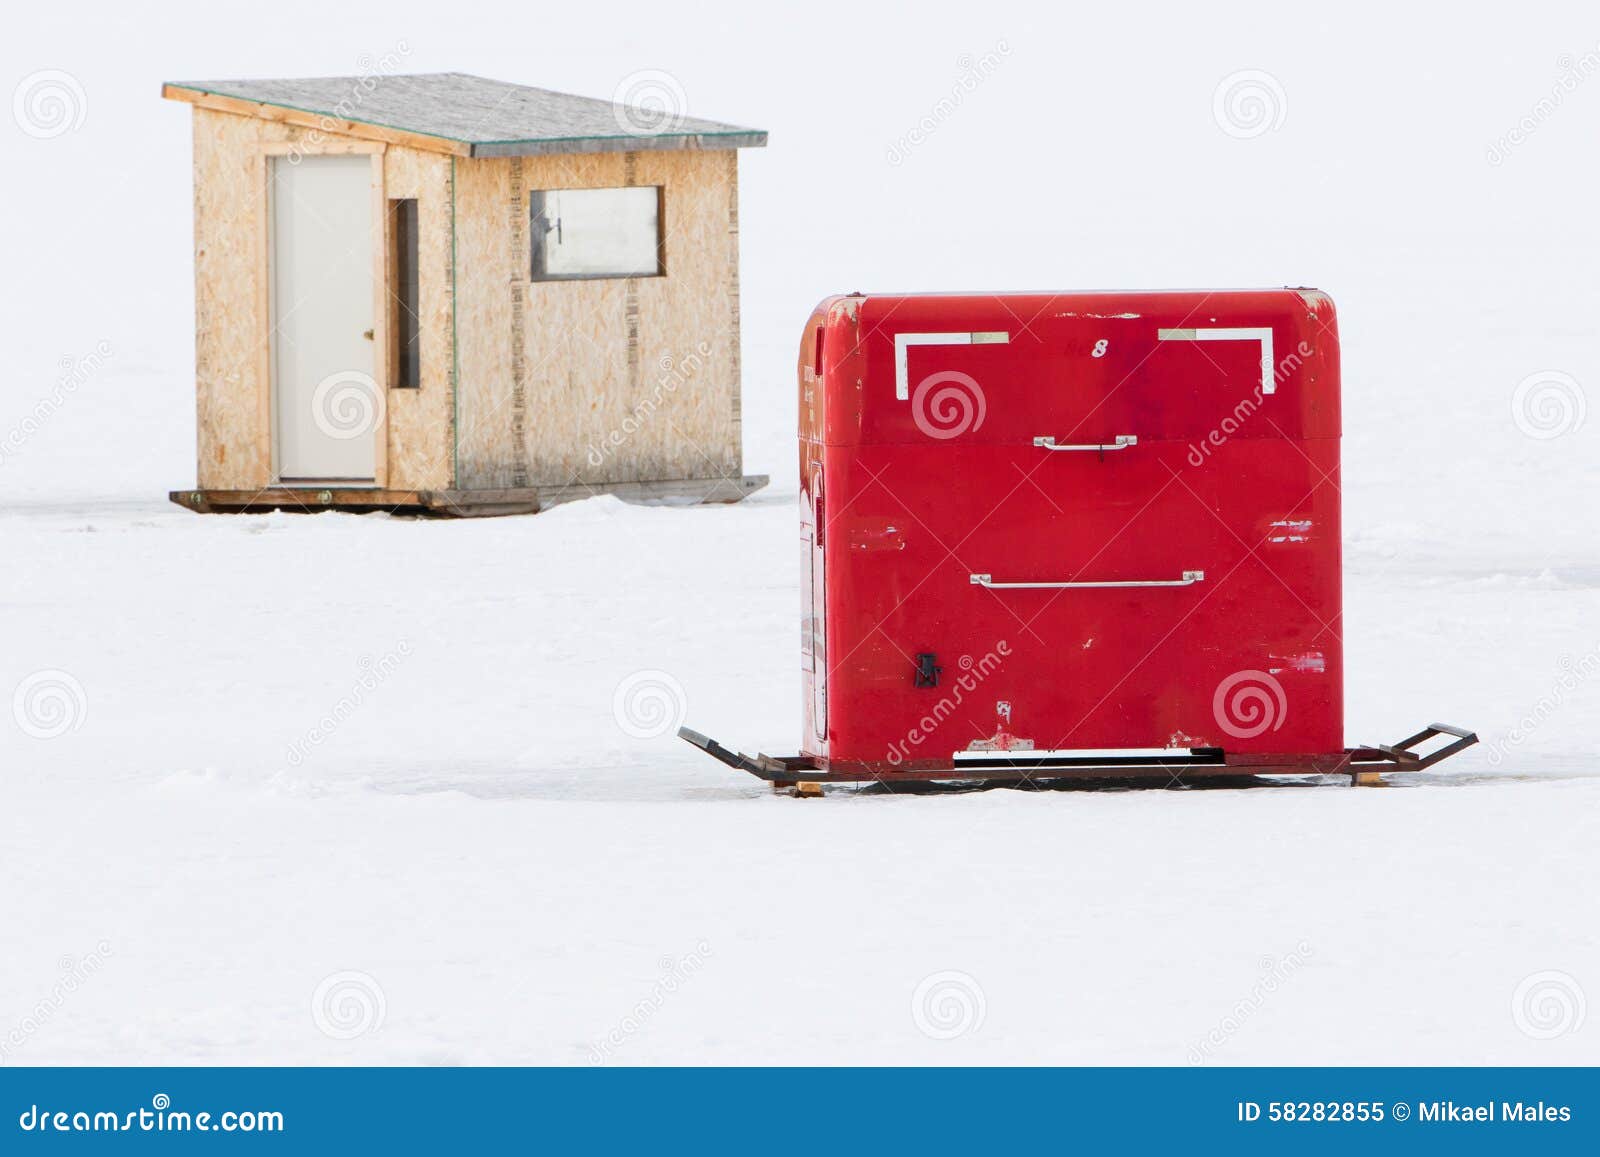 Ice Fishing Huts: Over 33 Royalty-Free Licensable Stock Illustrations &  Drawings